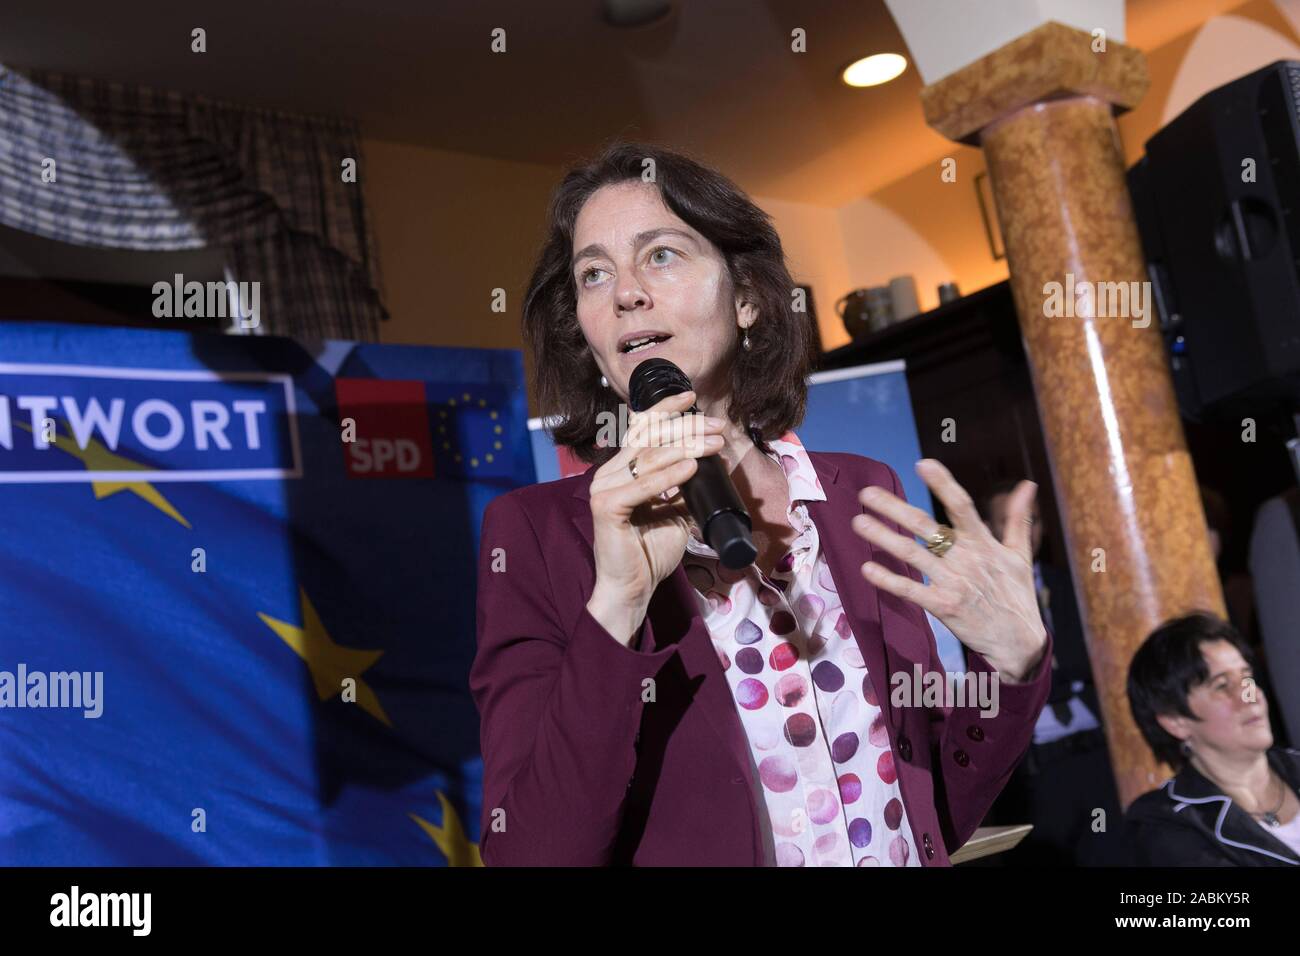 Top candidate Katarina Barley speaks at a campaign event of the SPD for the European elections 2019 in the Franziskaner in Munich. Maria Noichl, Member of the European Parliament, sits to her right. [automated translation] Stock Photo